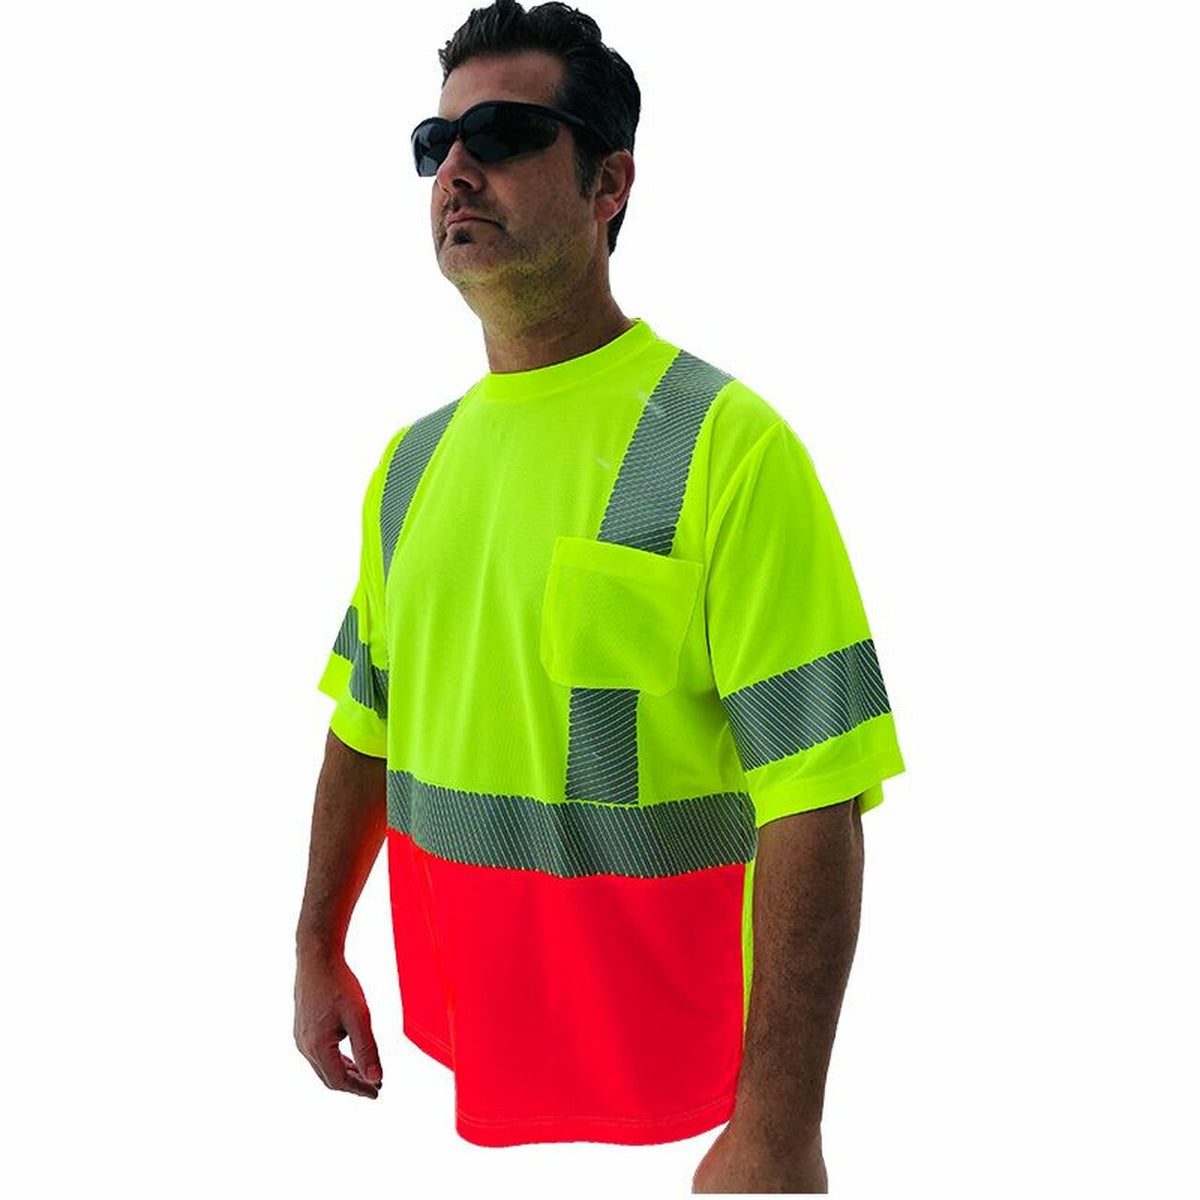 Forester Hi-Vis Red Bottom Class 3 Reflective Safety T-Shirt